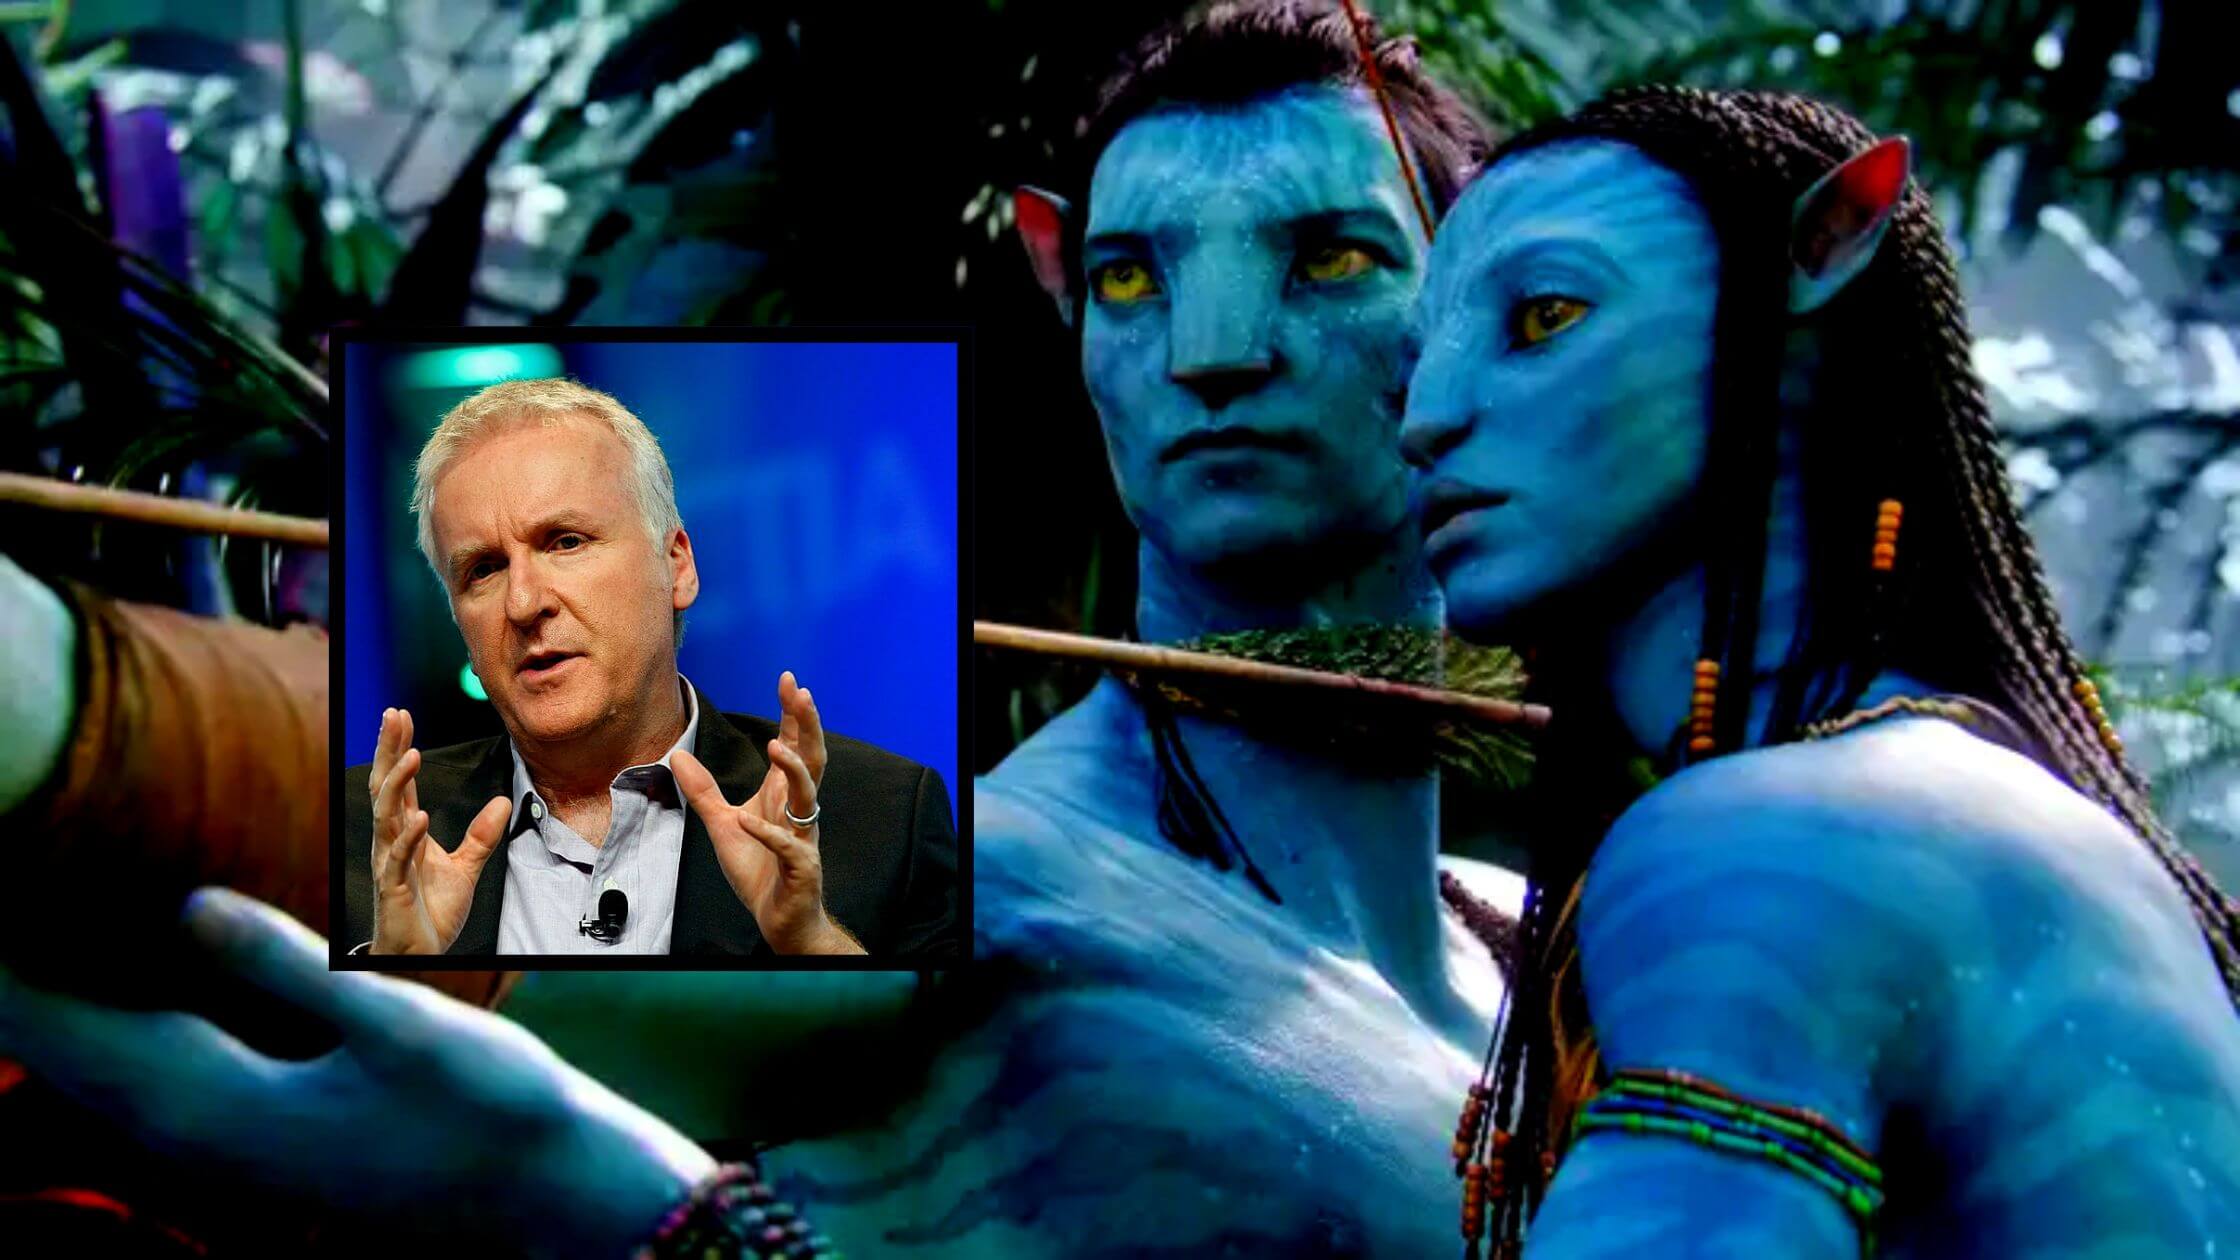 'Avatar' Director James Cameron Chucked Out Fox Exec Who Wanted It Shortened